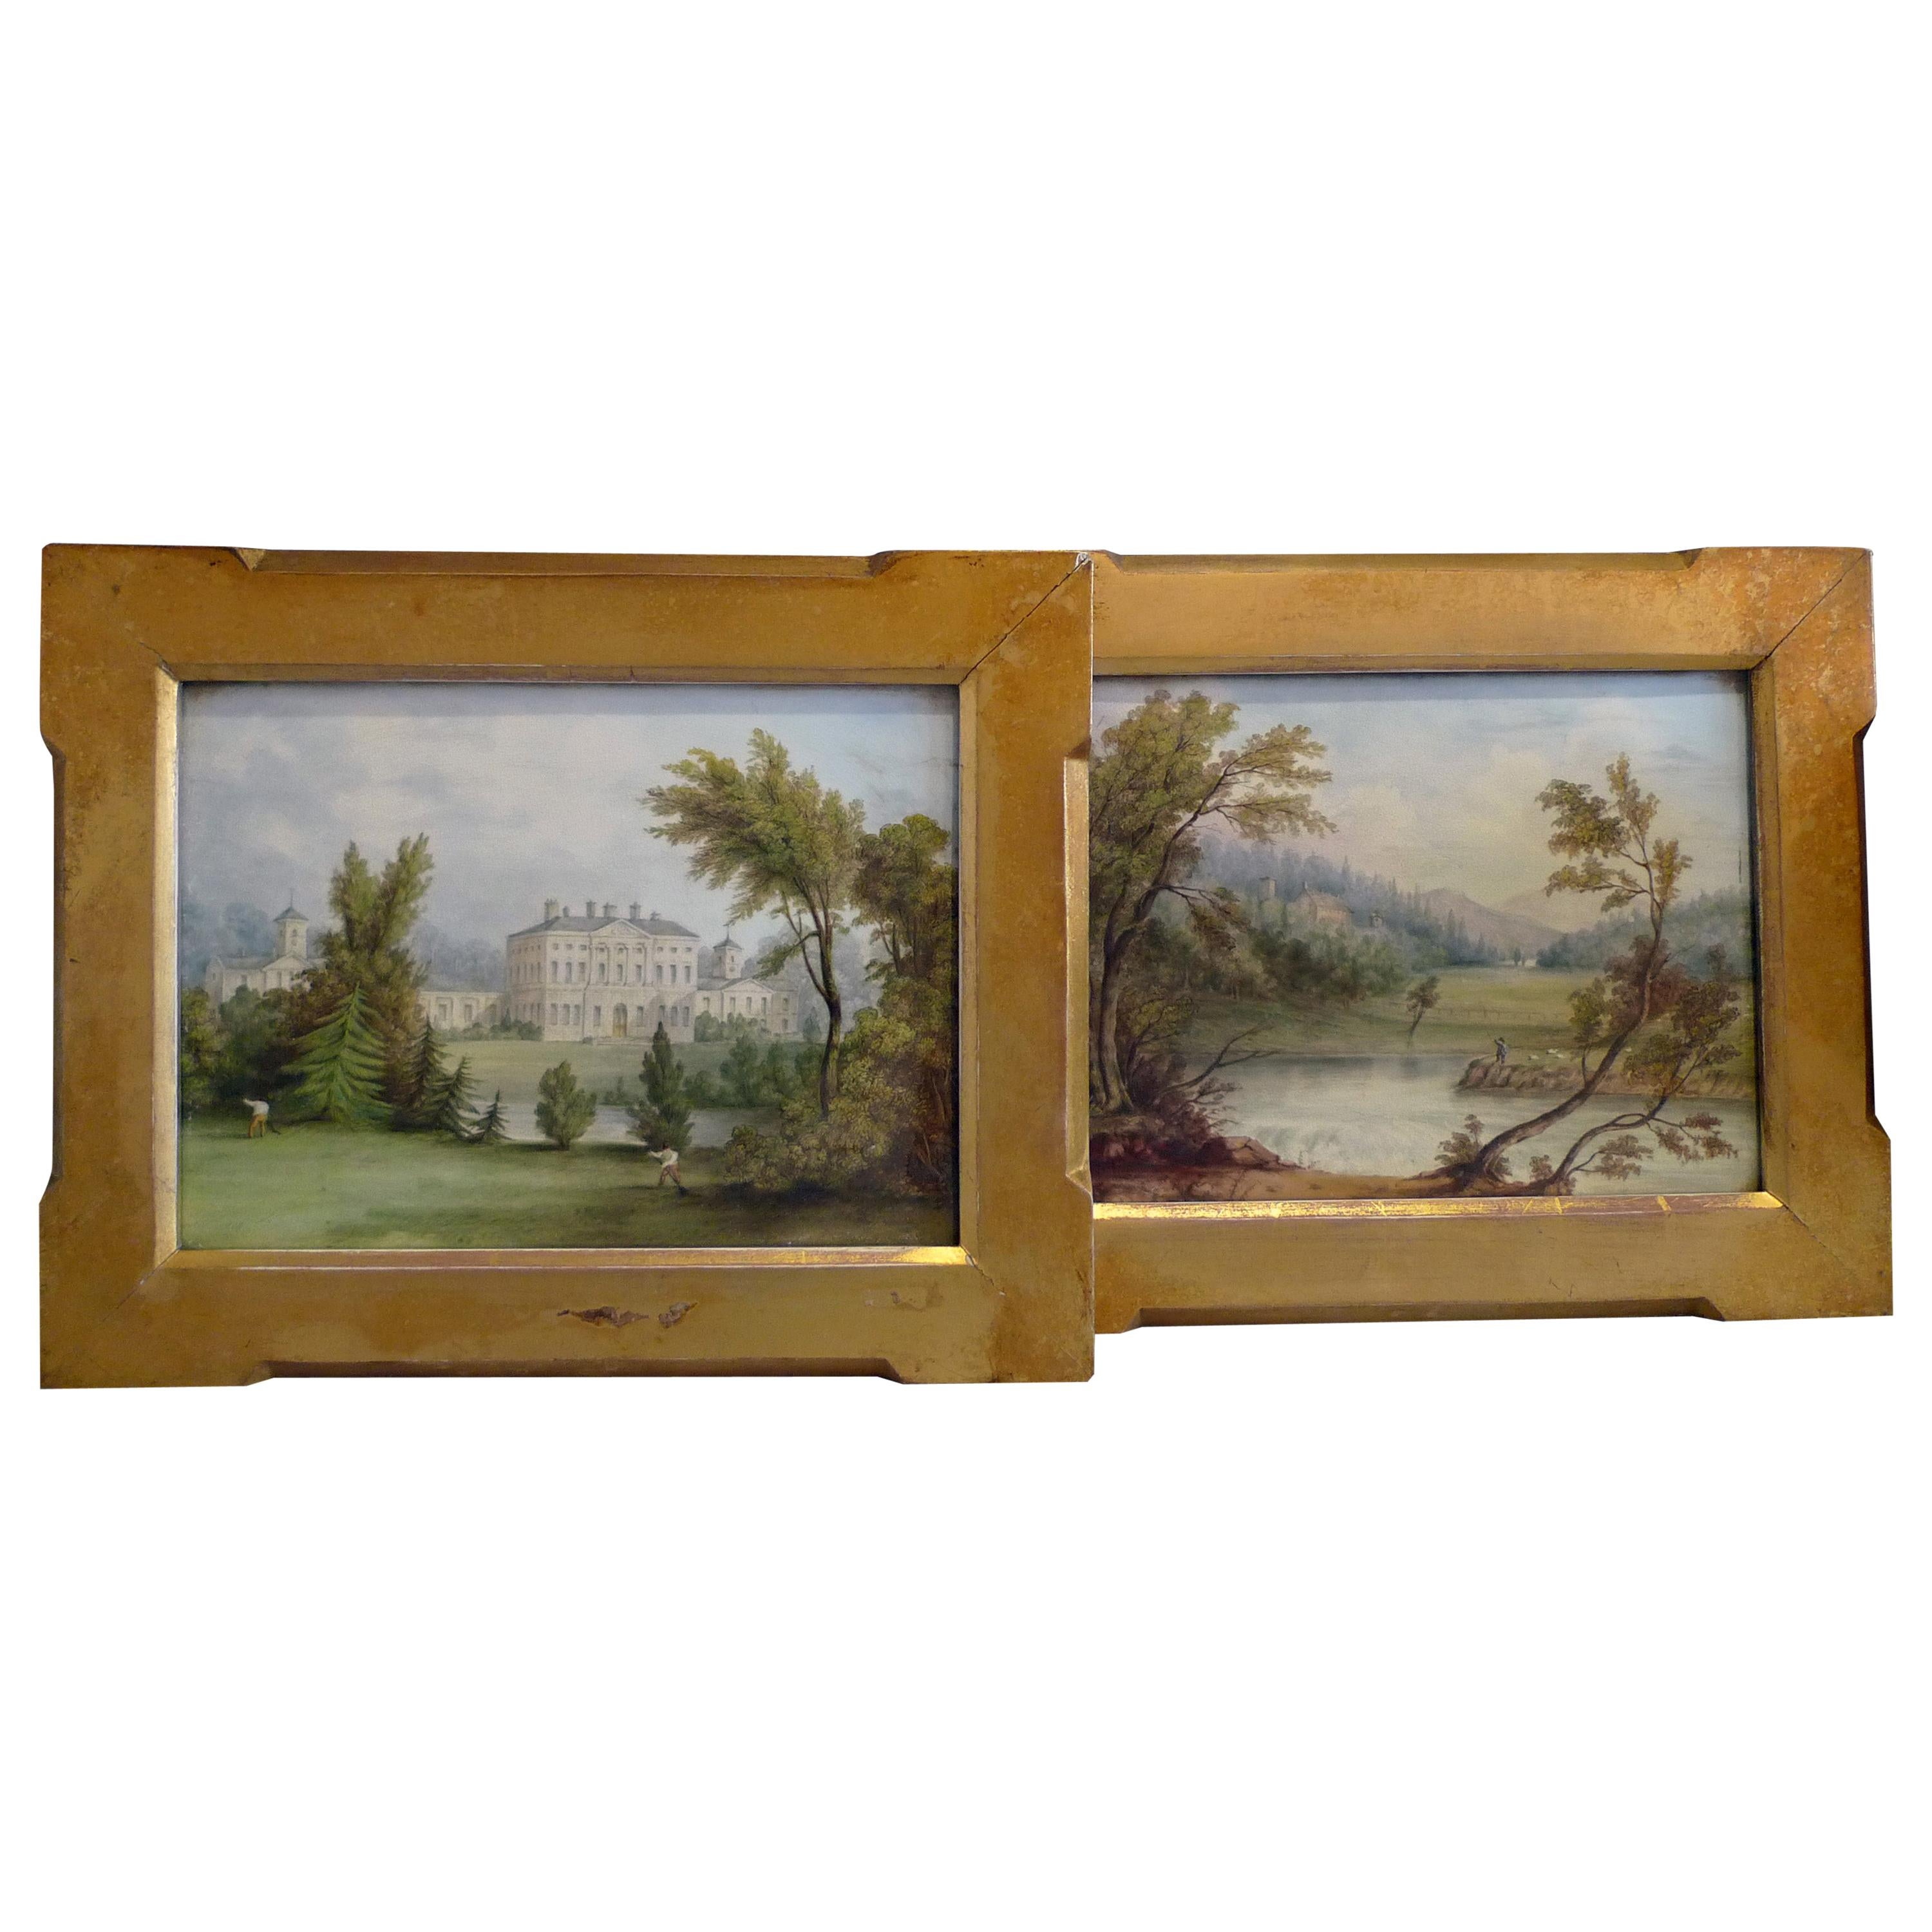 Pair of Derby English Porcelain Plaques Painted by Wm Hancock in Gilded Frames